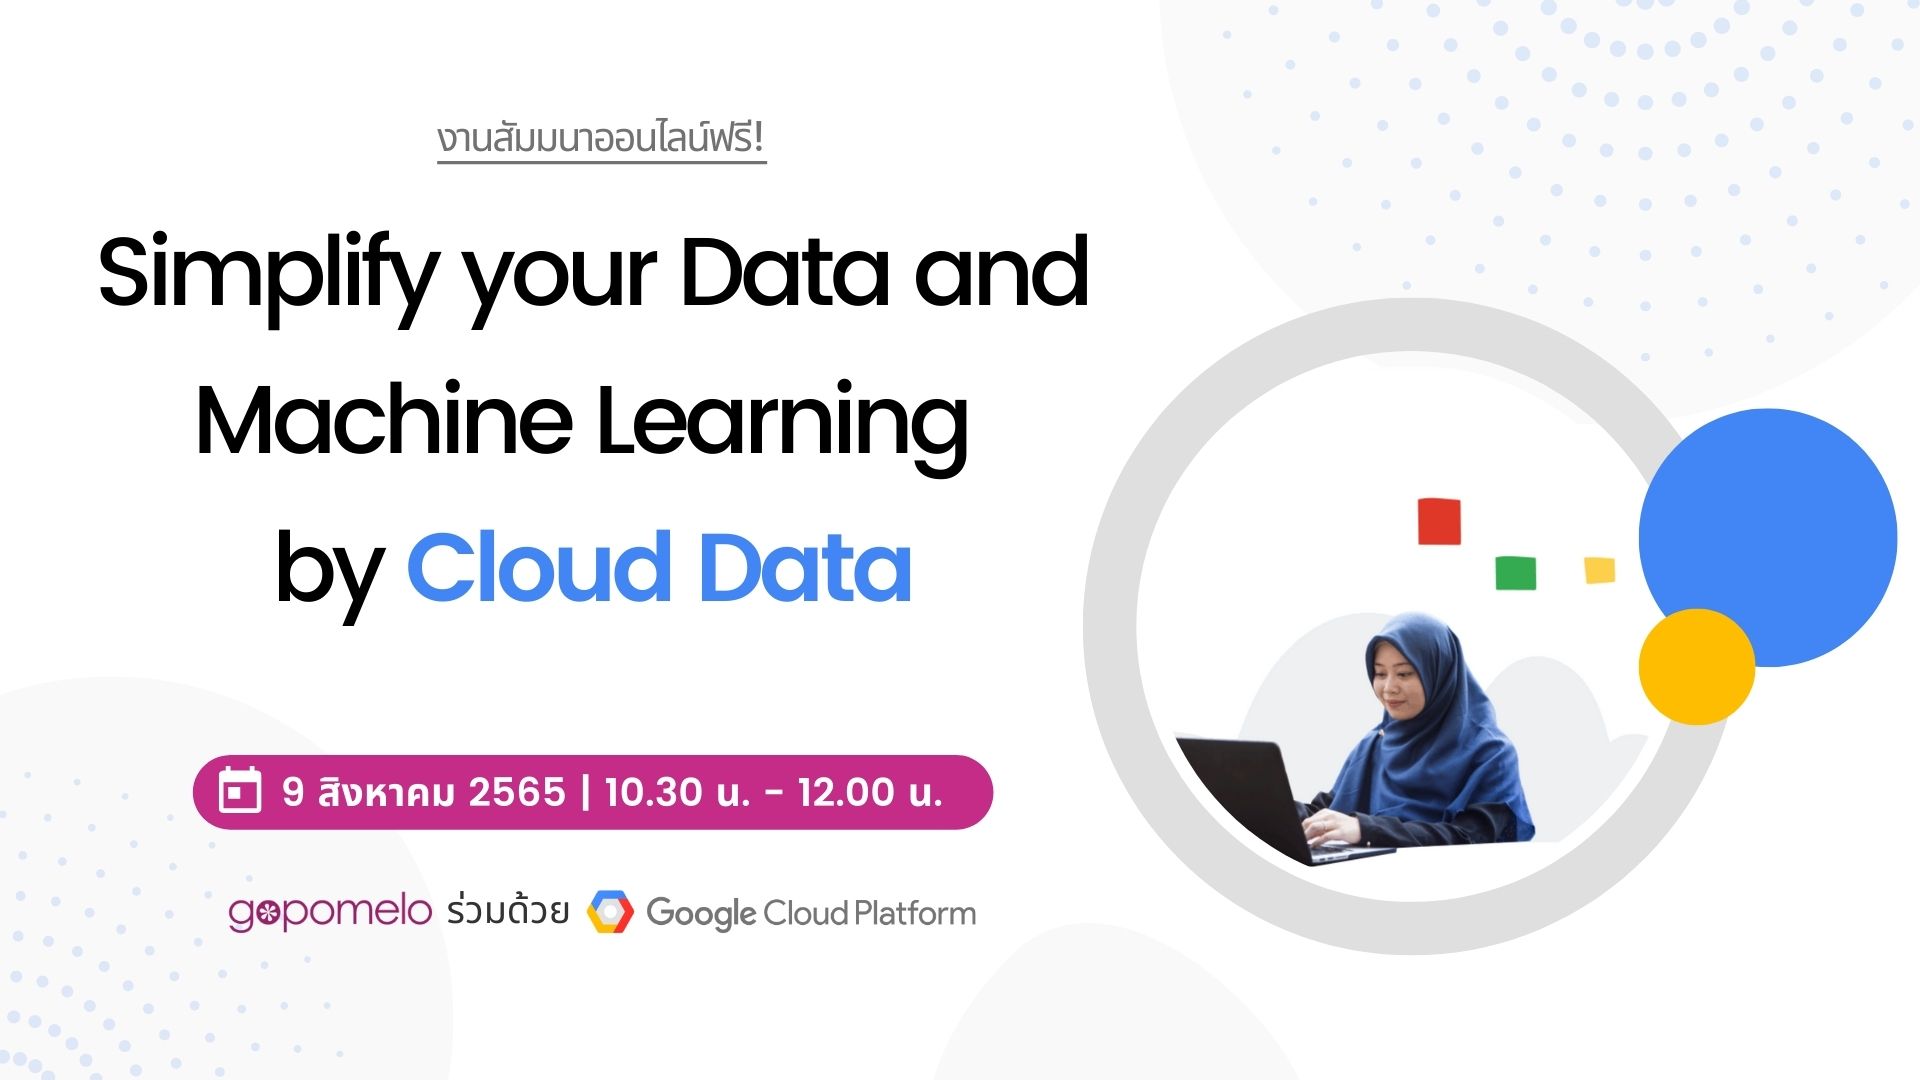 Simplify your Data/ Machine Learning by Cloud Data